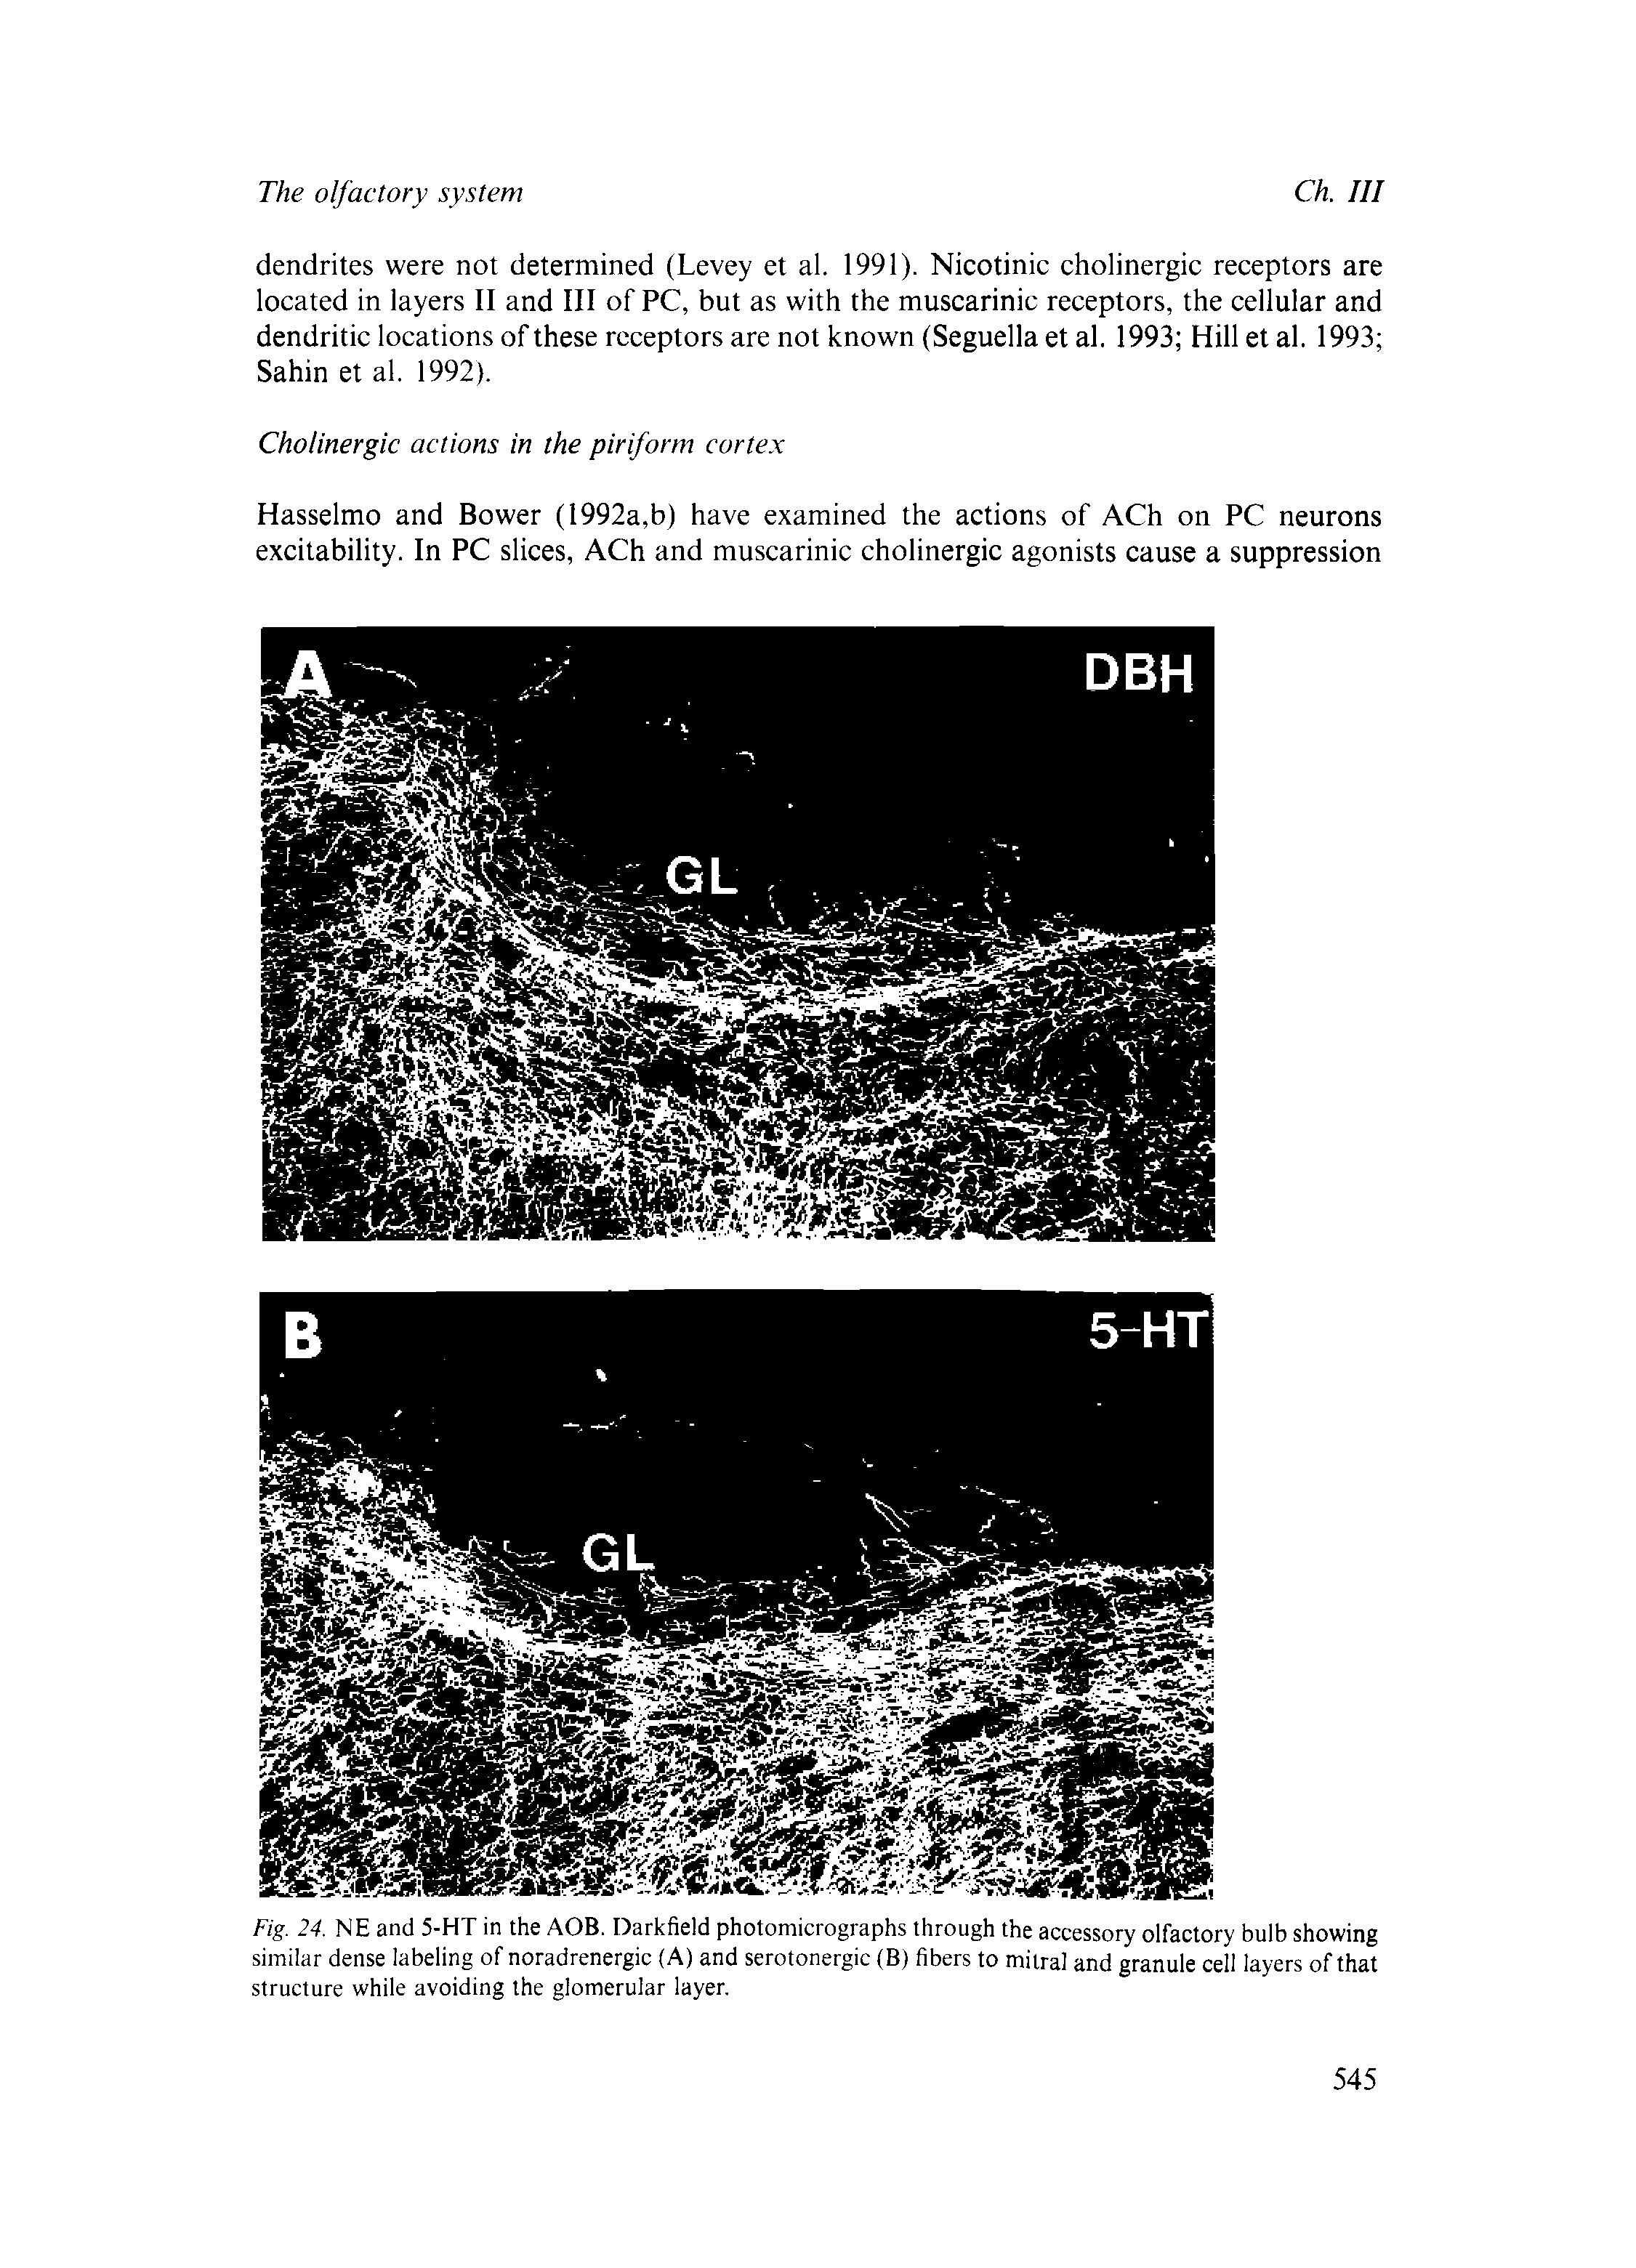 Fig. 24. NE and 5-HT in the AOB. Darkfield photomicrographs through the accessory olfactory bulb showing similar dense labeling of noradrenergic (A) and serotonergic (B) fibers to mitral and granule cell layers of that structure while avoiding the glomerular layer.